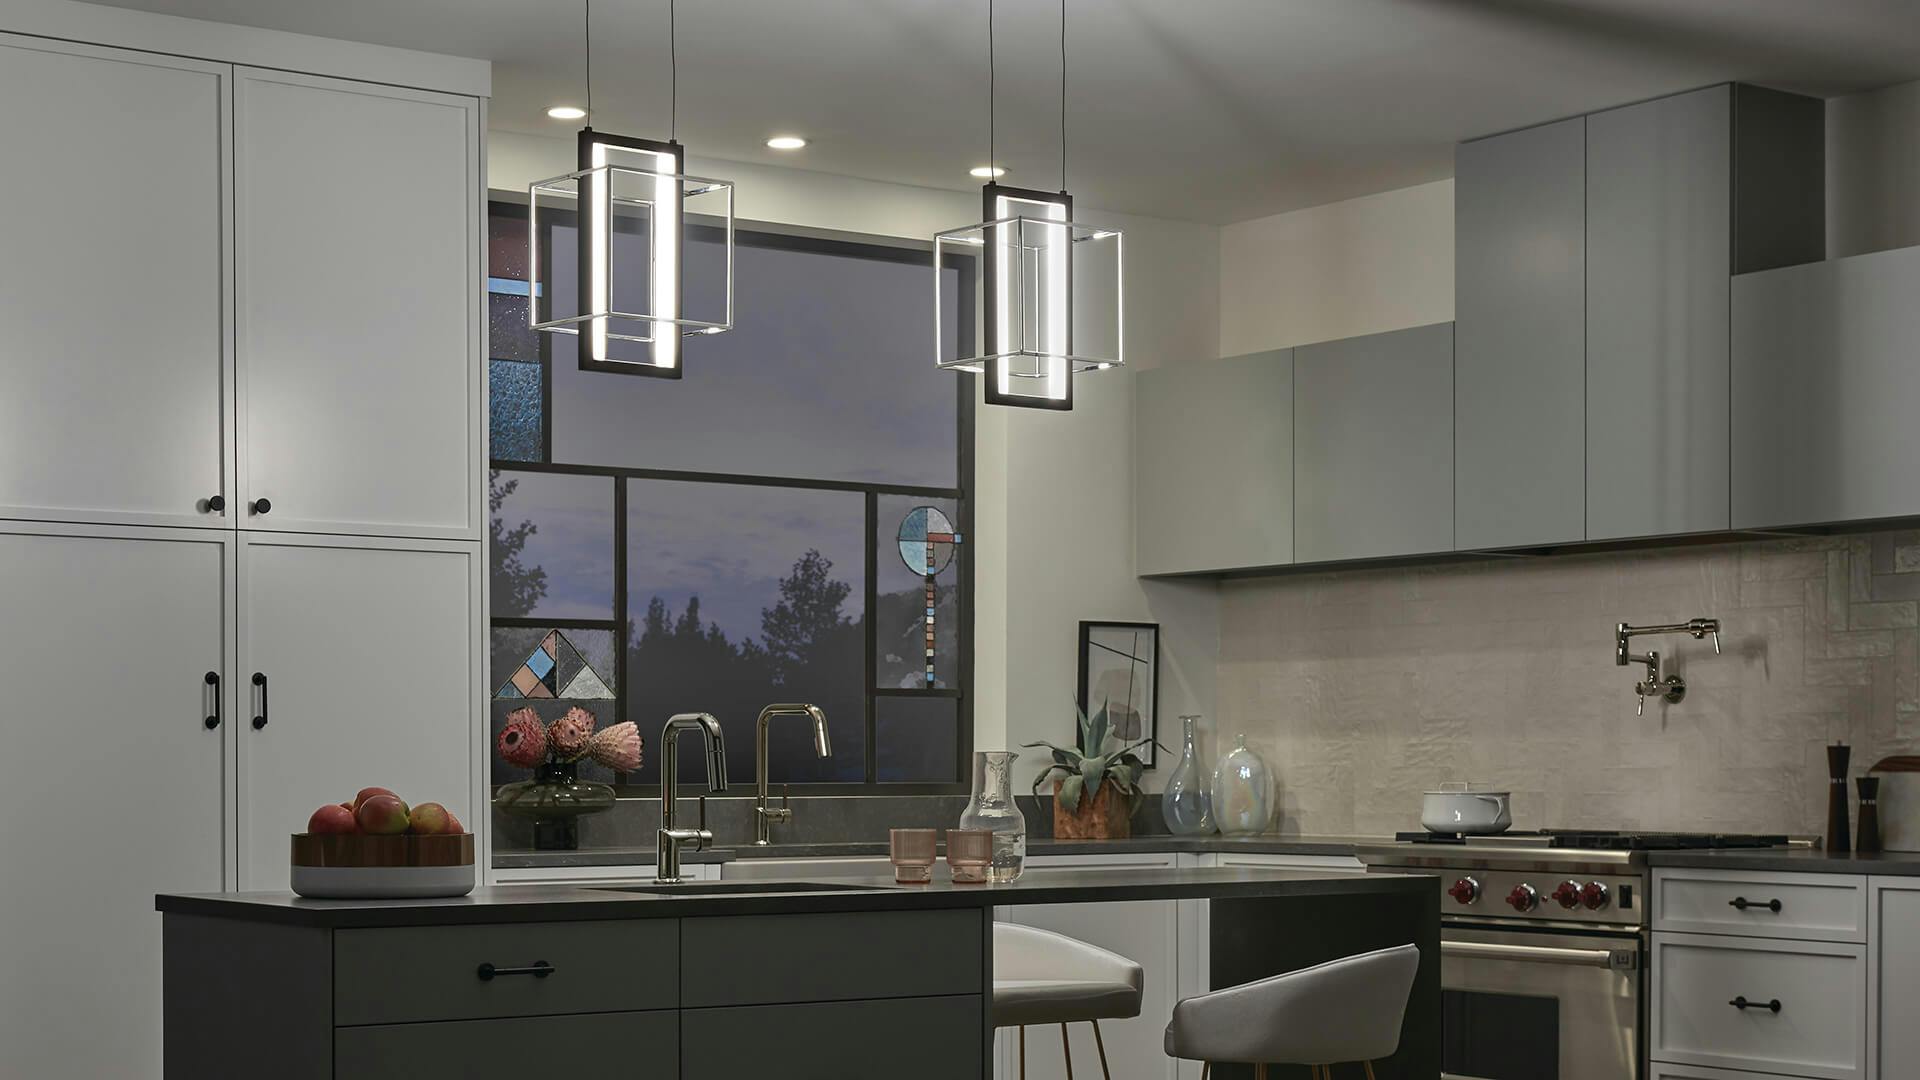 Modern kitchen at night with two Viho pendant lights over a kitchen island.